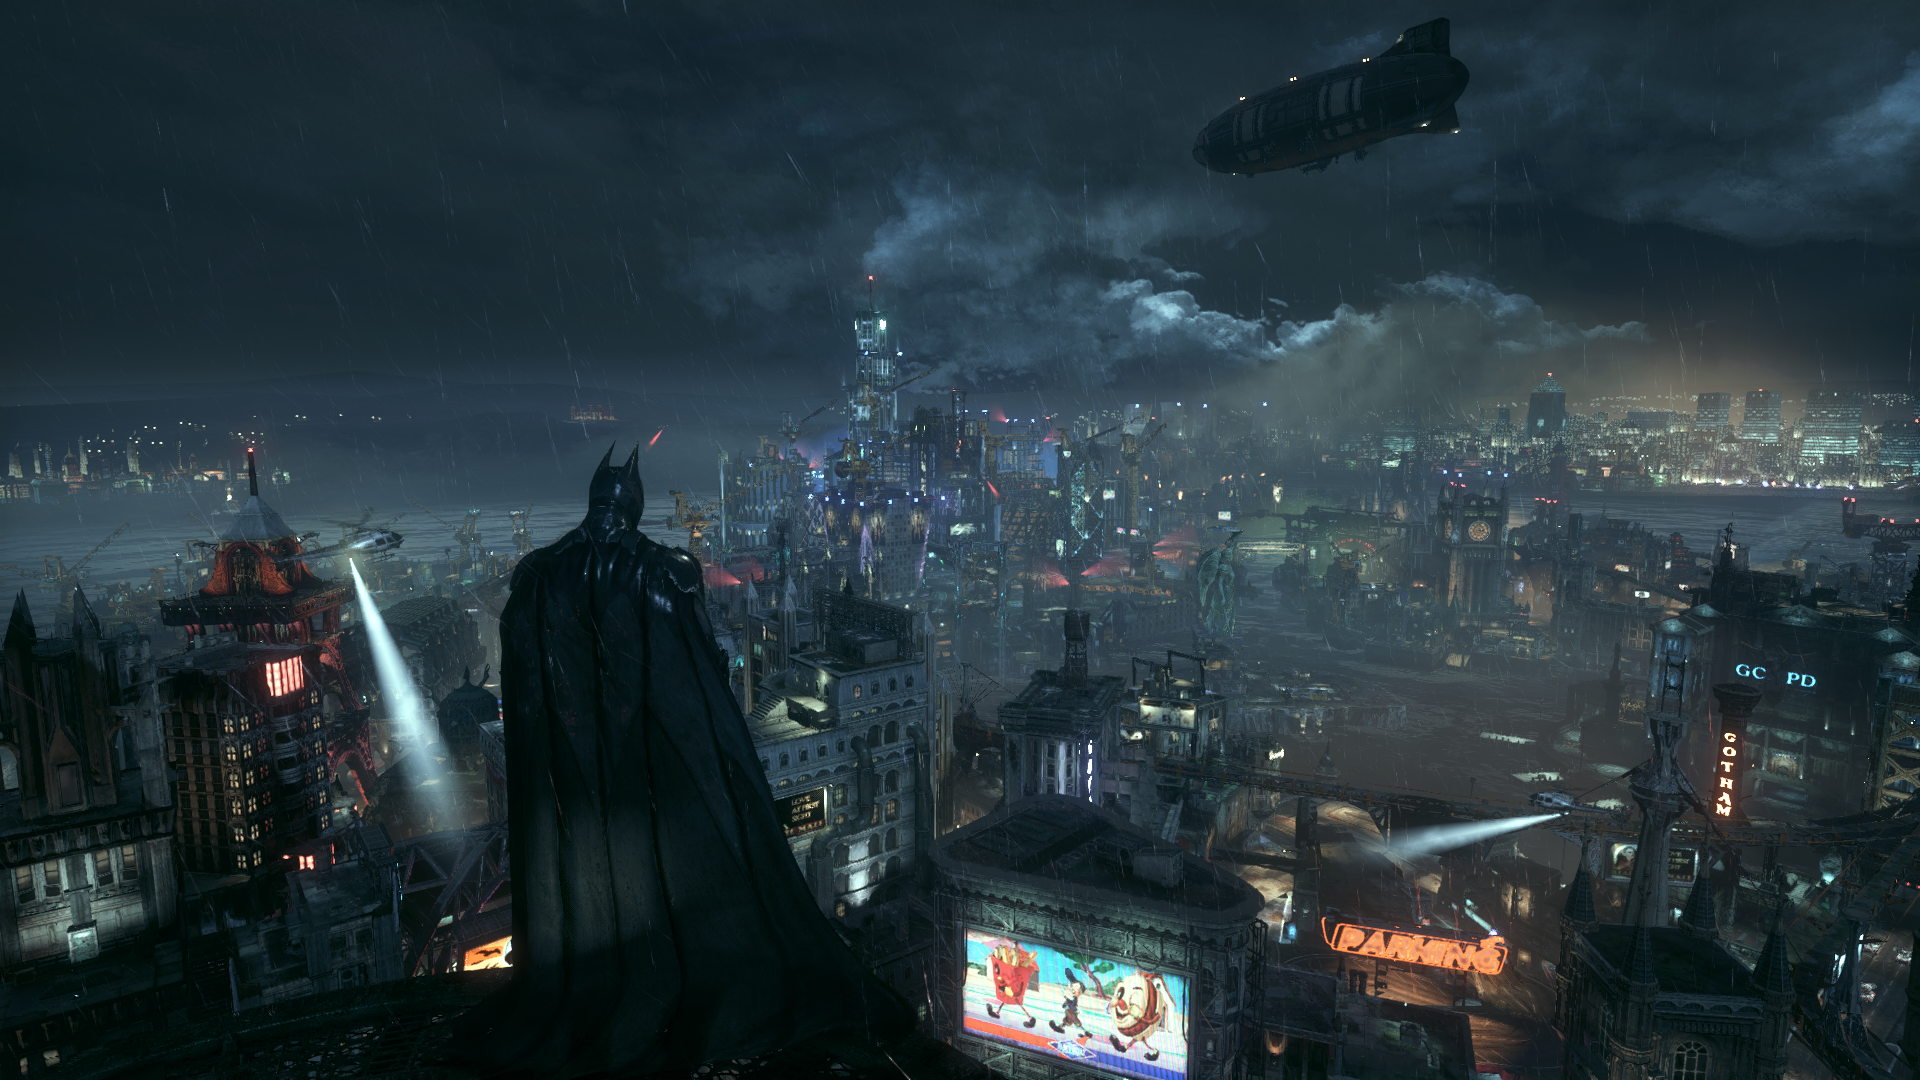 General 1920x1080 Batman: Arkham Knight PC gaming video games city night rain video game art screen shot standing sky cape clouds building sign video game characters CGI cityscape lights blimp